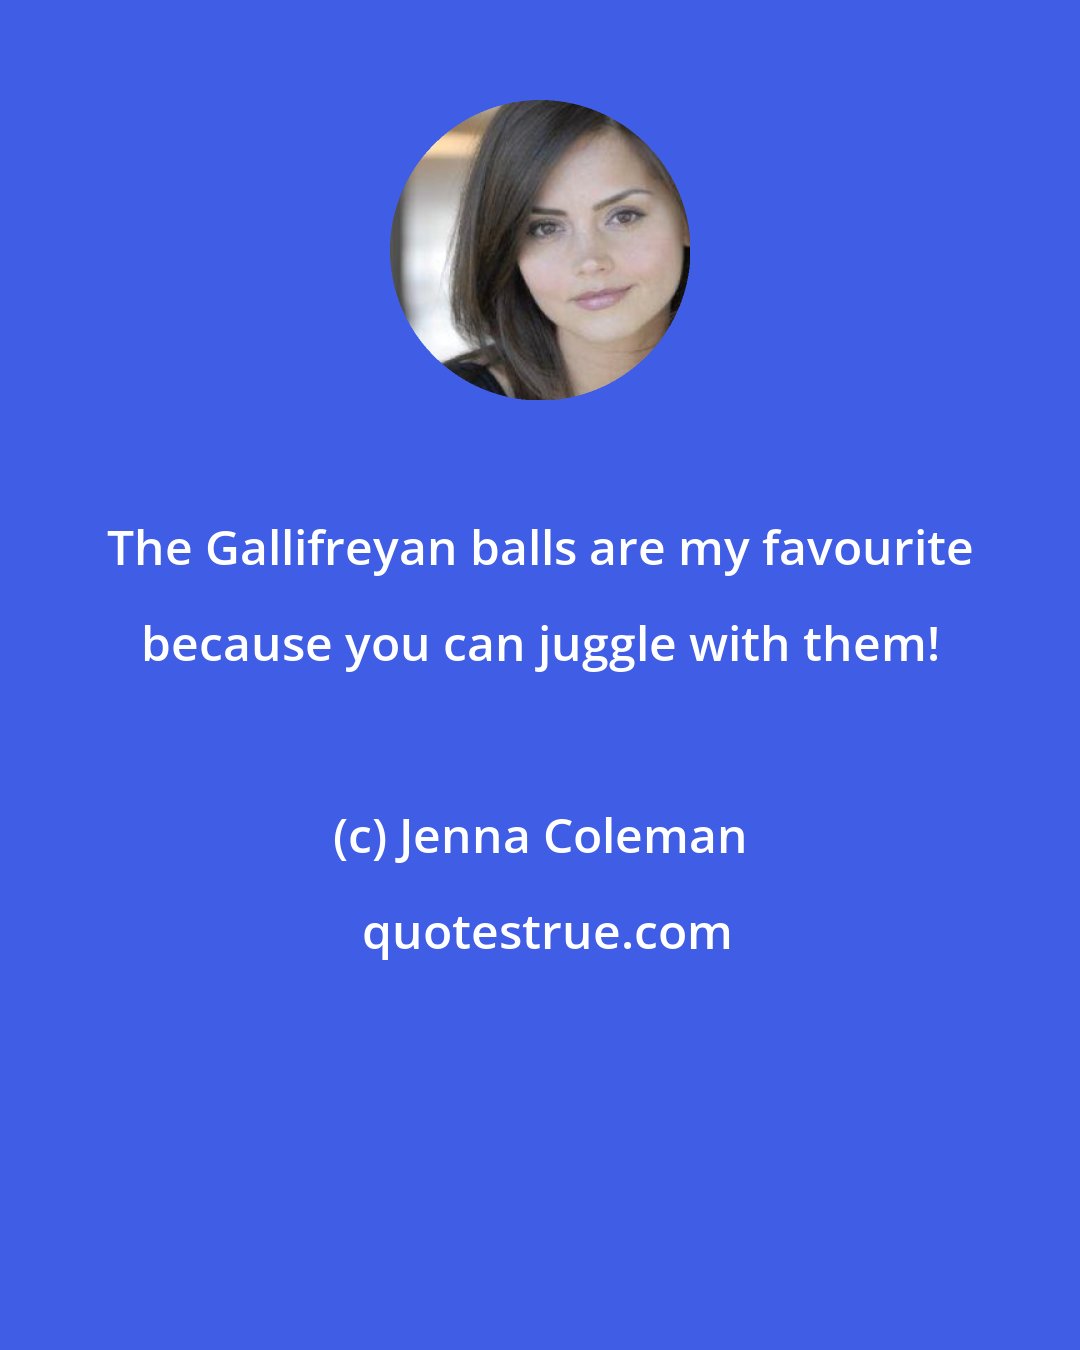 Jenna Coleman: The Gallifreyan balls are my favourite because you can juggle with them!